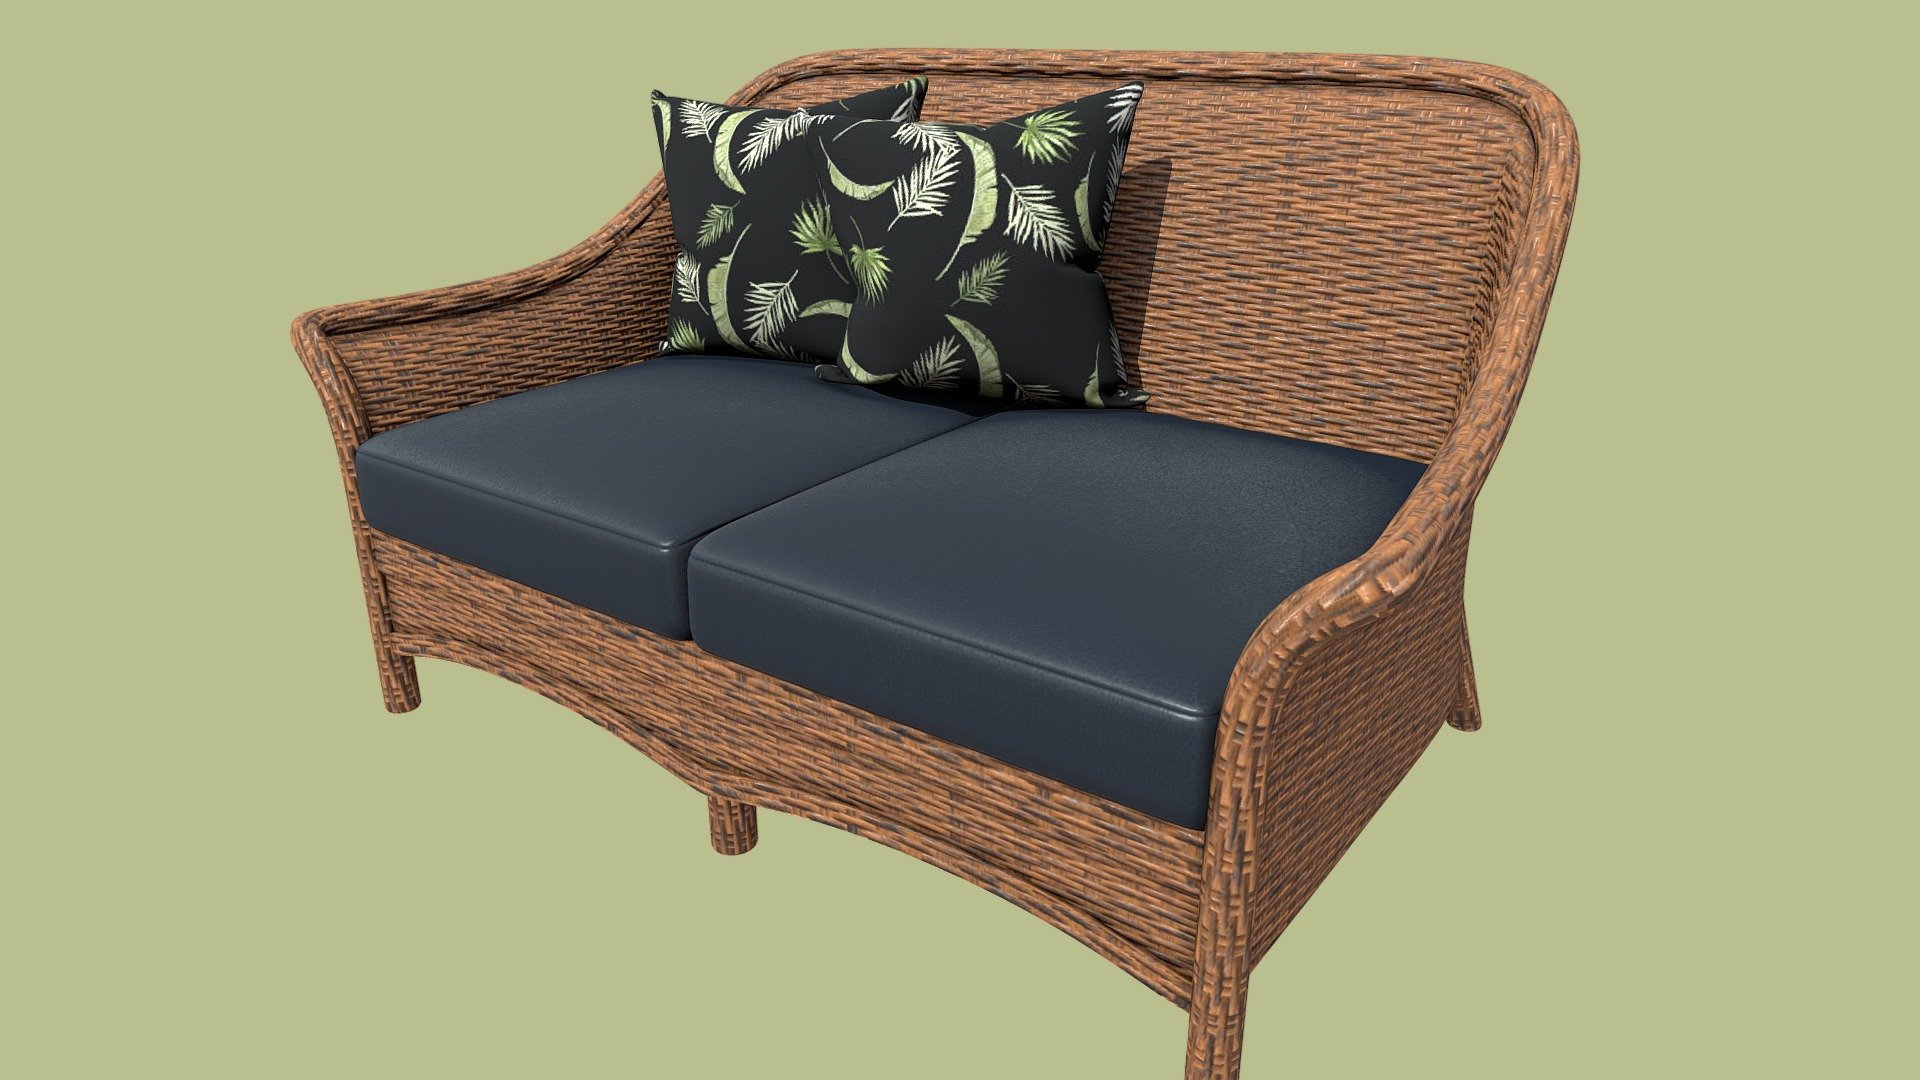 File format: FBX,OBJ,glb

Textures: 2K, 1K (Albedo, Normal, Metallic, Roughness, AO)

Intended use: AR/VR/Gaming

**Real-world scale

Tools used: Blender3D + Substance Painter
 - IRA 2 Seater Sofa - 3D model by monkxperience 3d model